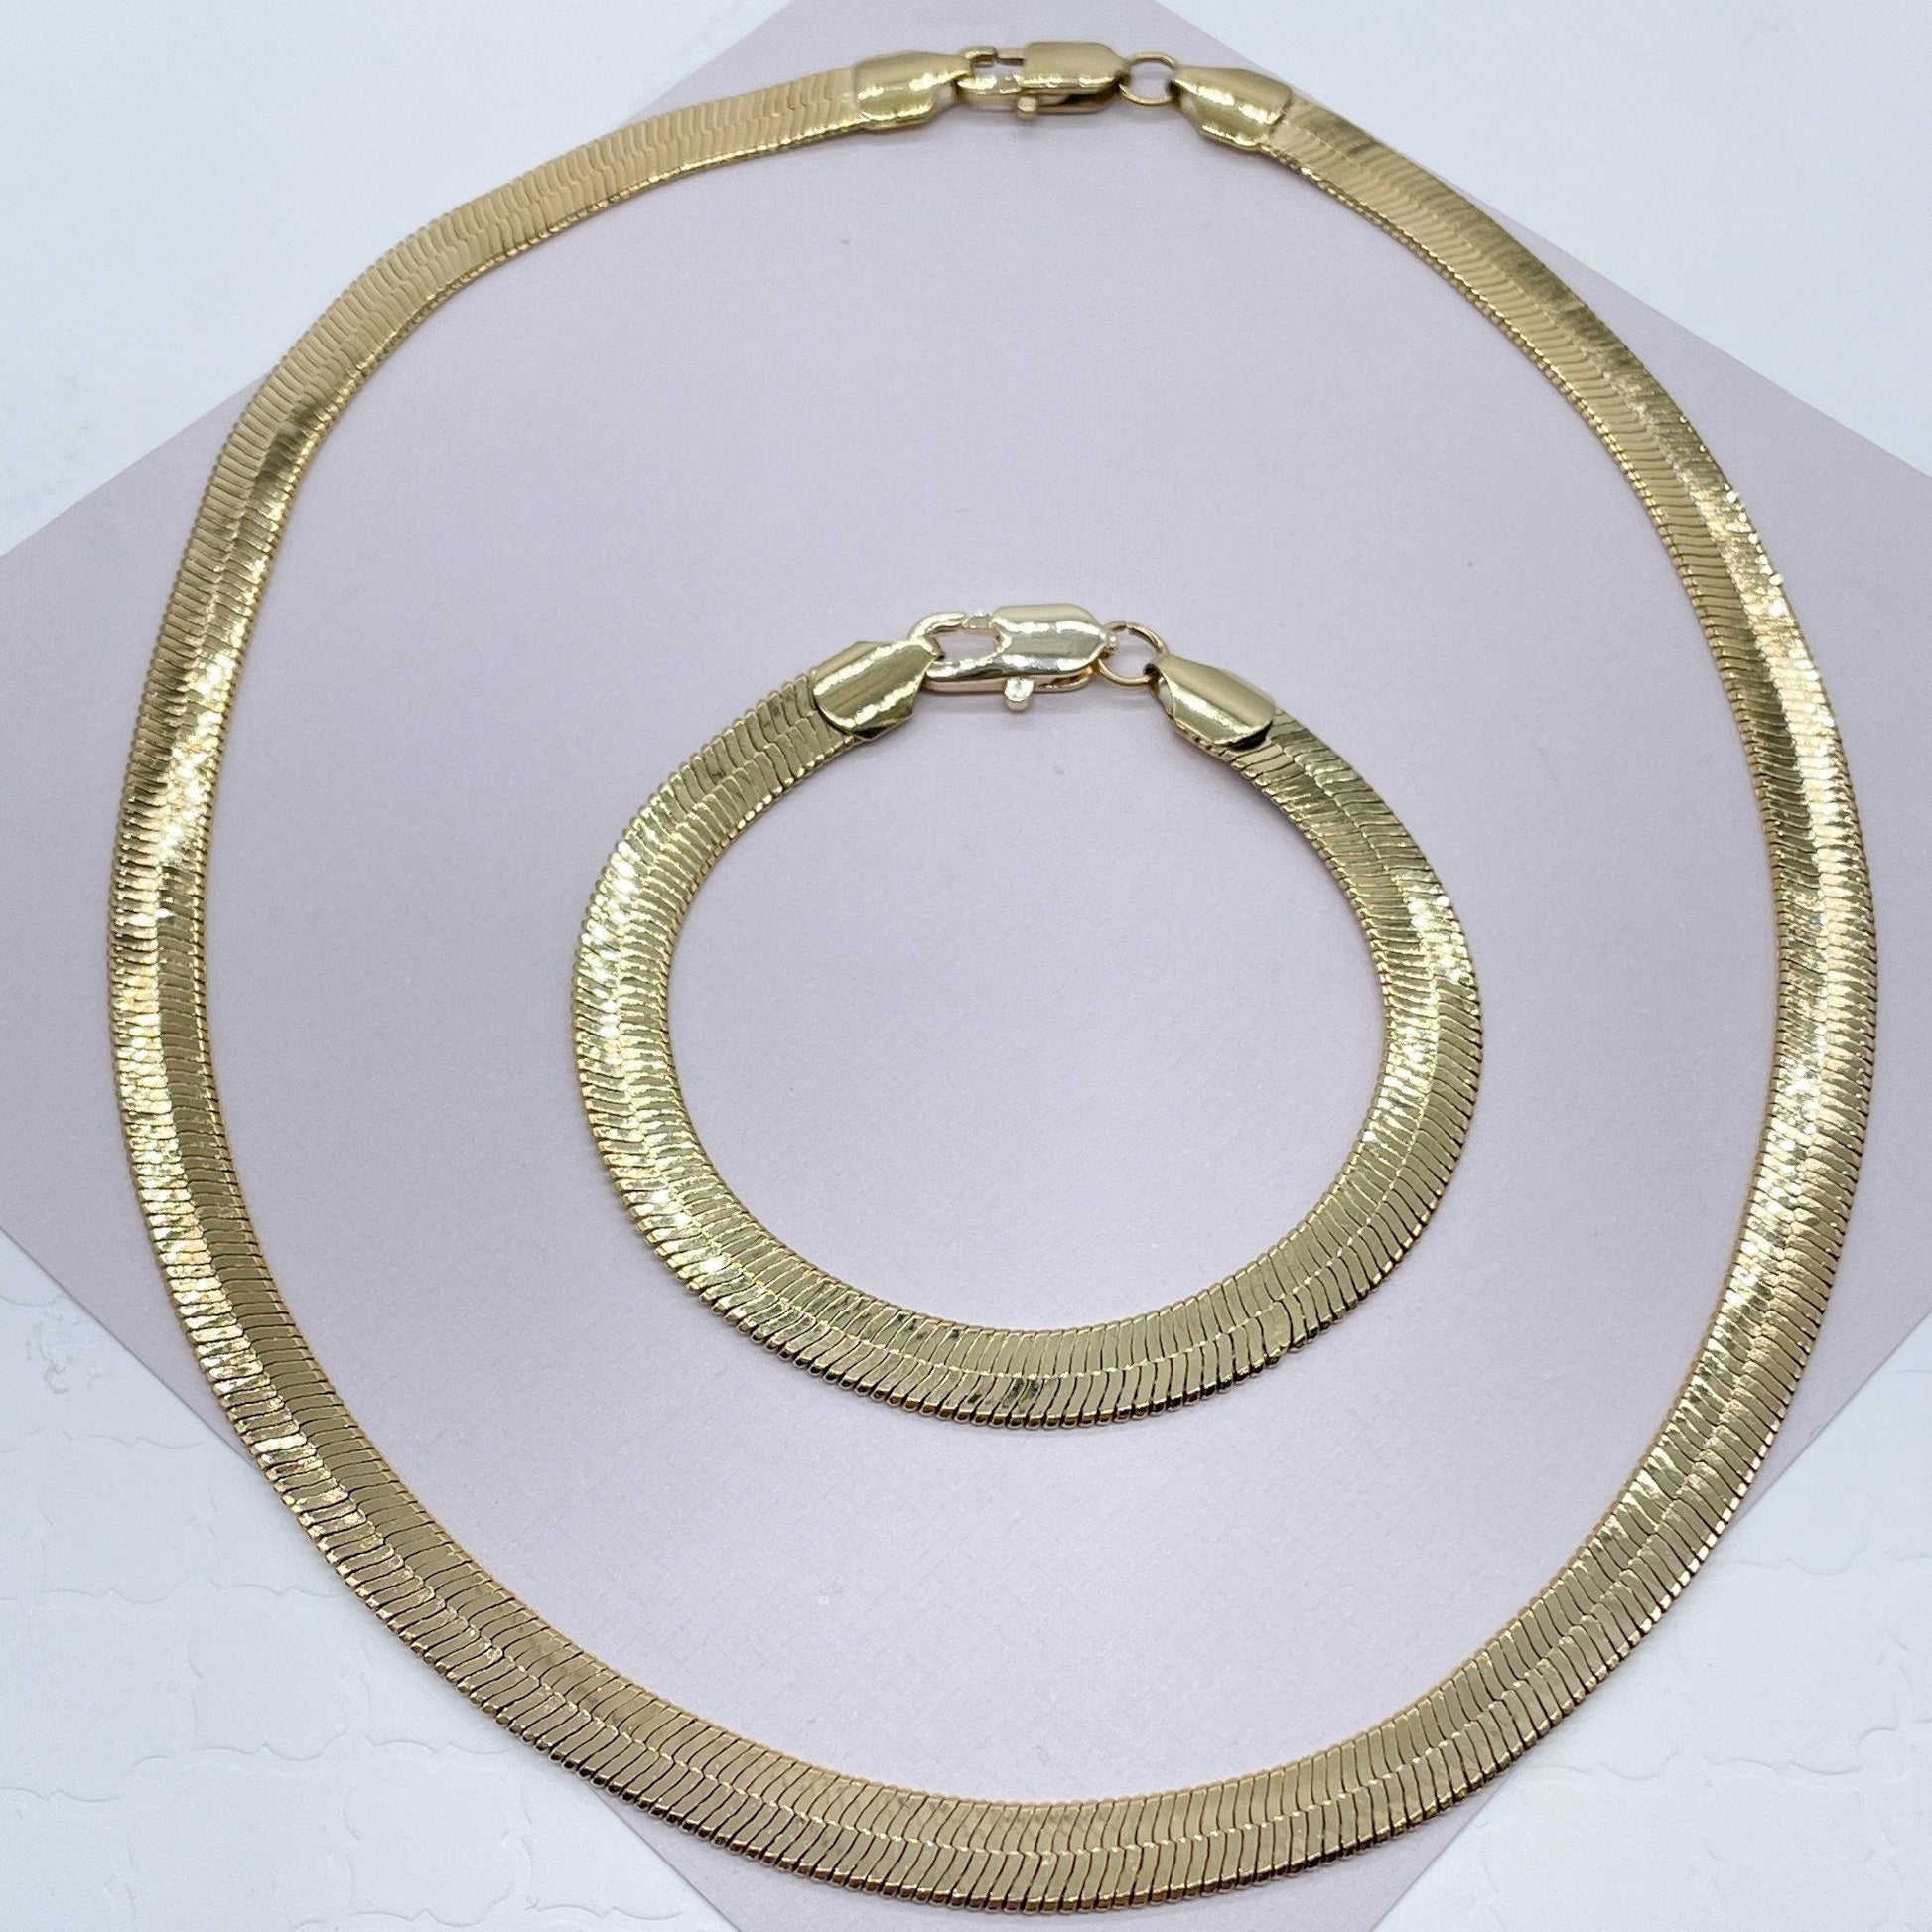 14k Gold Filled 7mm Herringbone Necklace  Layering Jewelry Bracelet Available   And Jewelry Making Supplies